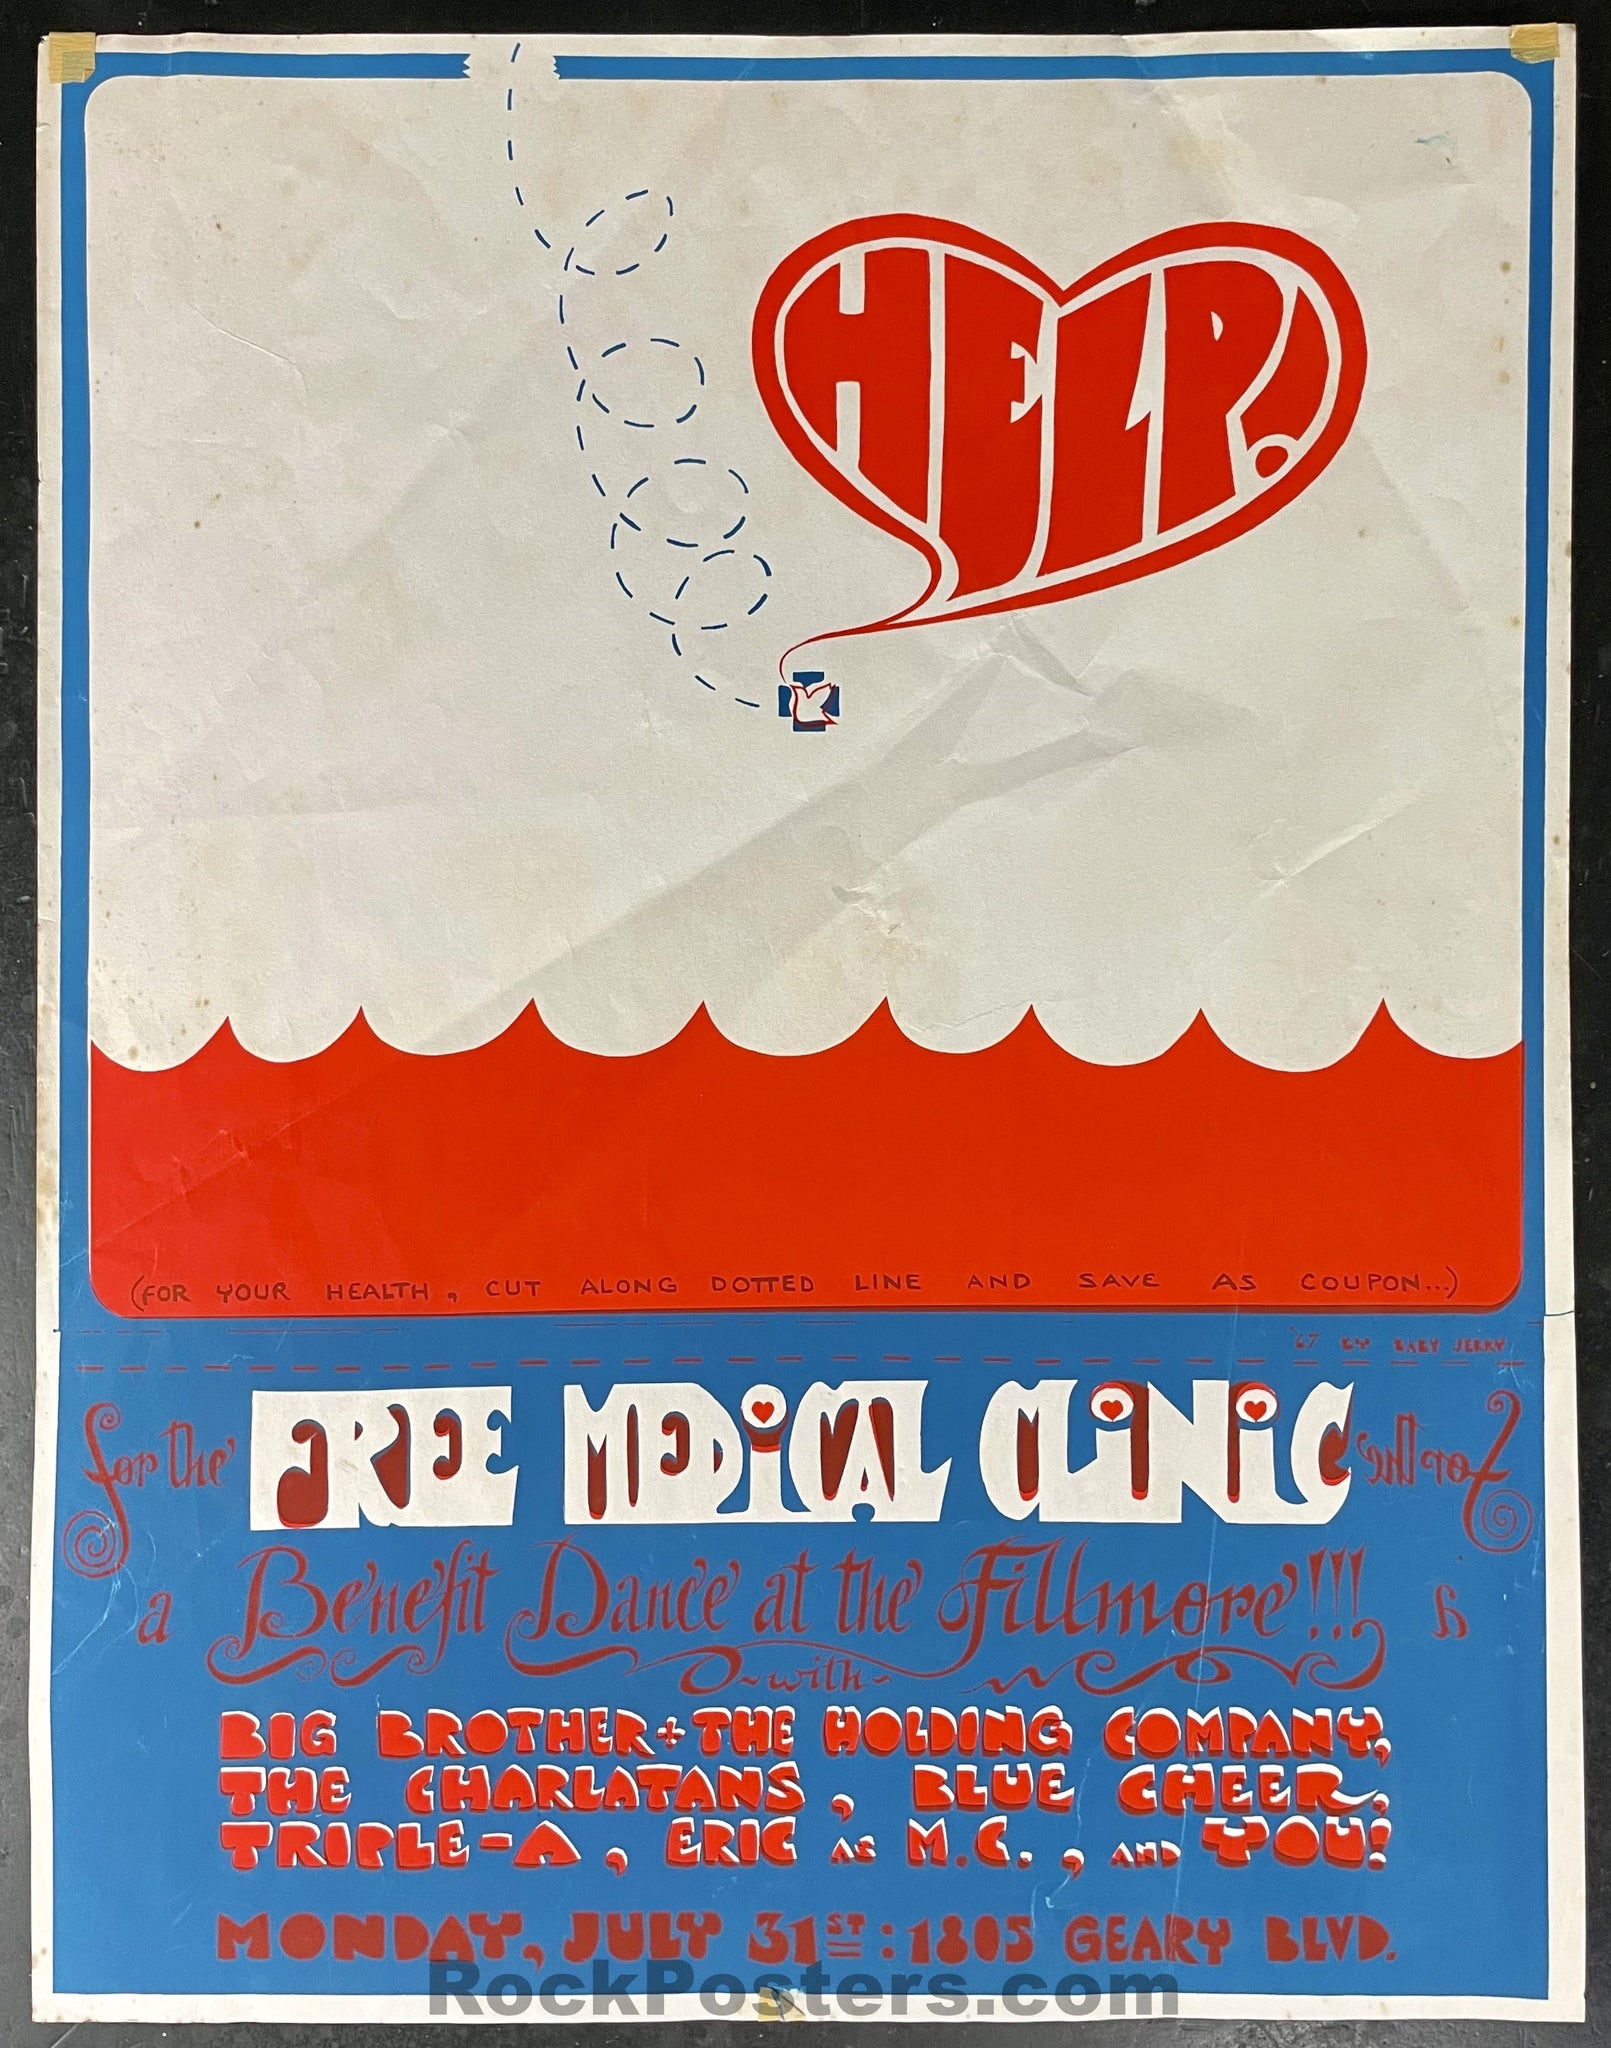 AUCTION - Big Brother Janis Joplin - Charlatans Blue Cheer - Benefit 1967 Poster - Fillmore Auditorium - Excellent